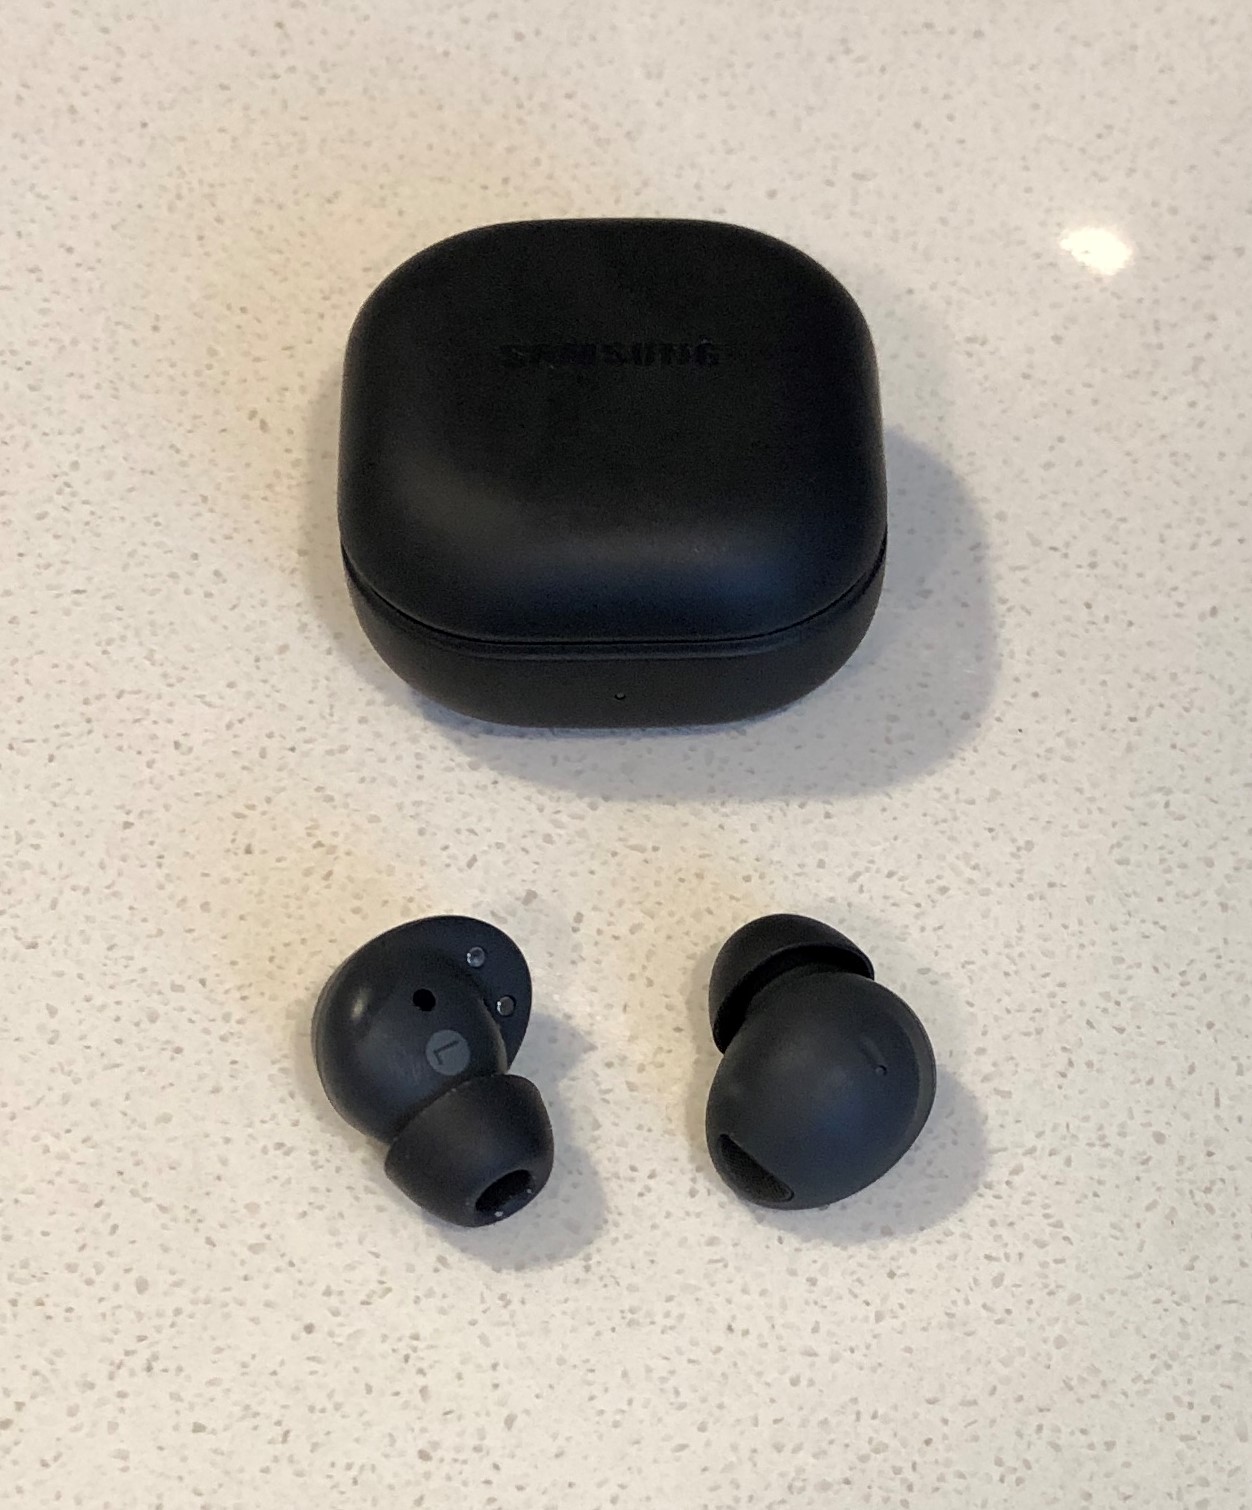 Samsung Galaxy Buds2 Pro charging case and wireless earbuds